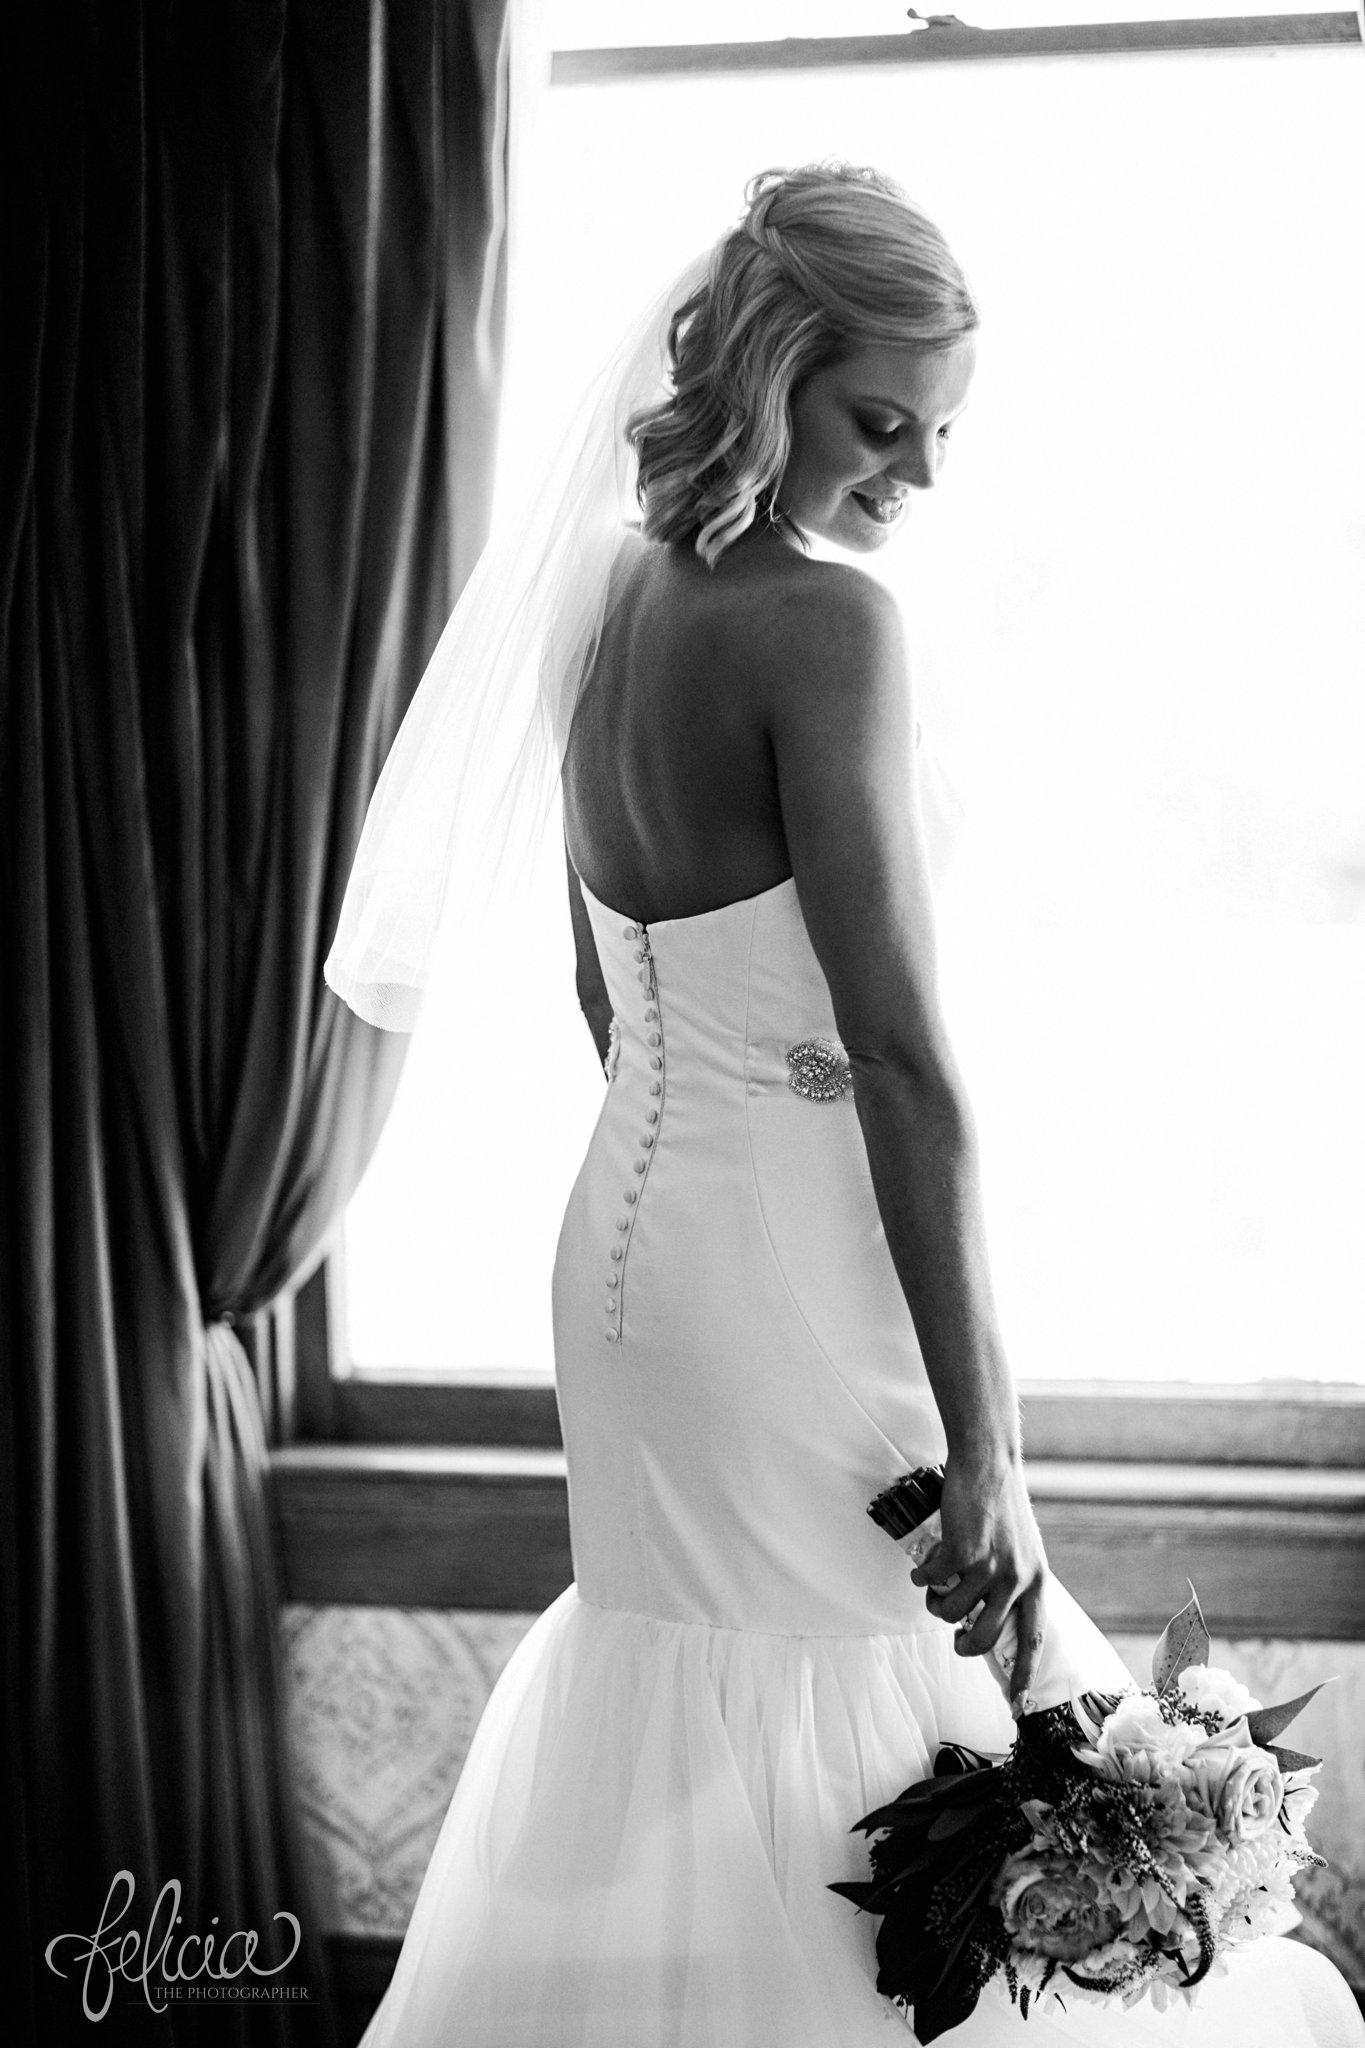 Black and White | Candid | Bride on Stairs | Victorian House | Eighteen Ninety | Kansas City Wedding | Felicia The Photographer